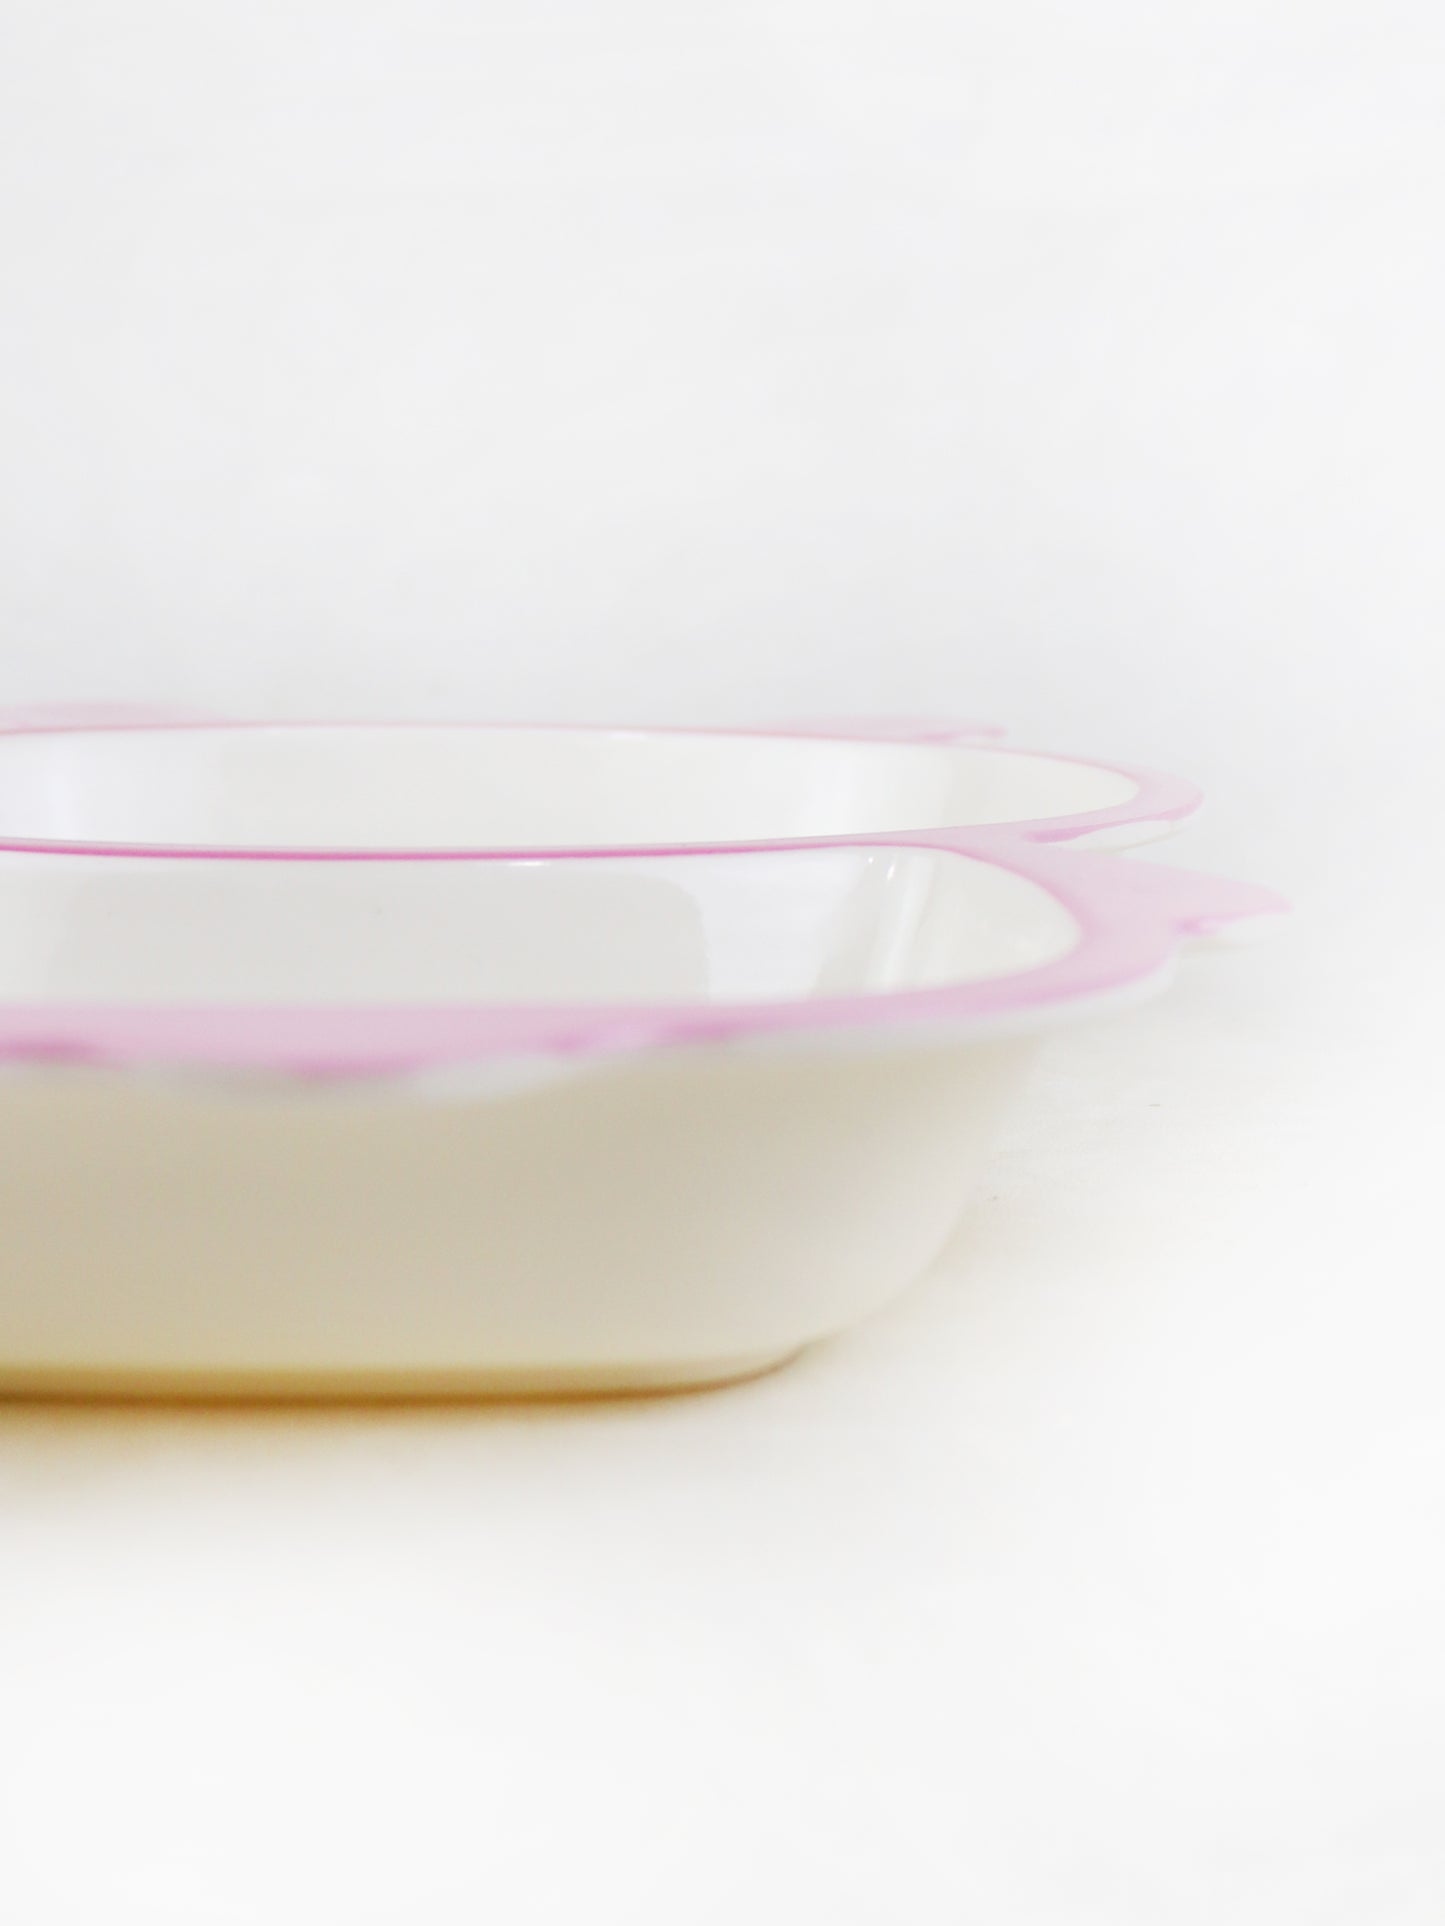 Cat Shaped 2-Compartment Melamine Tray Pink